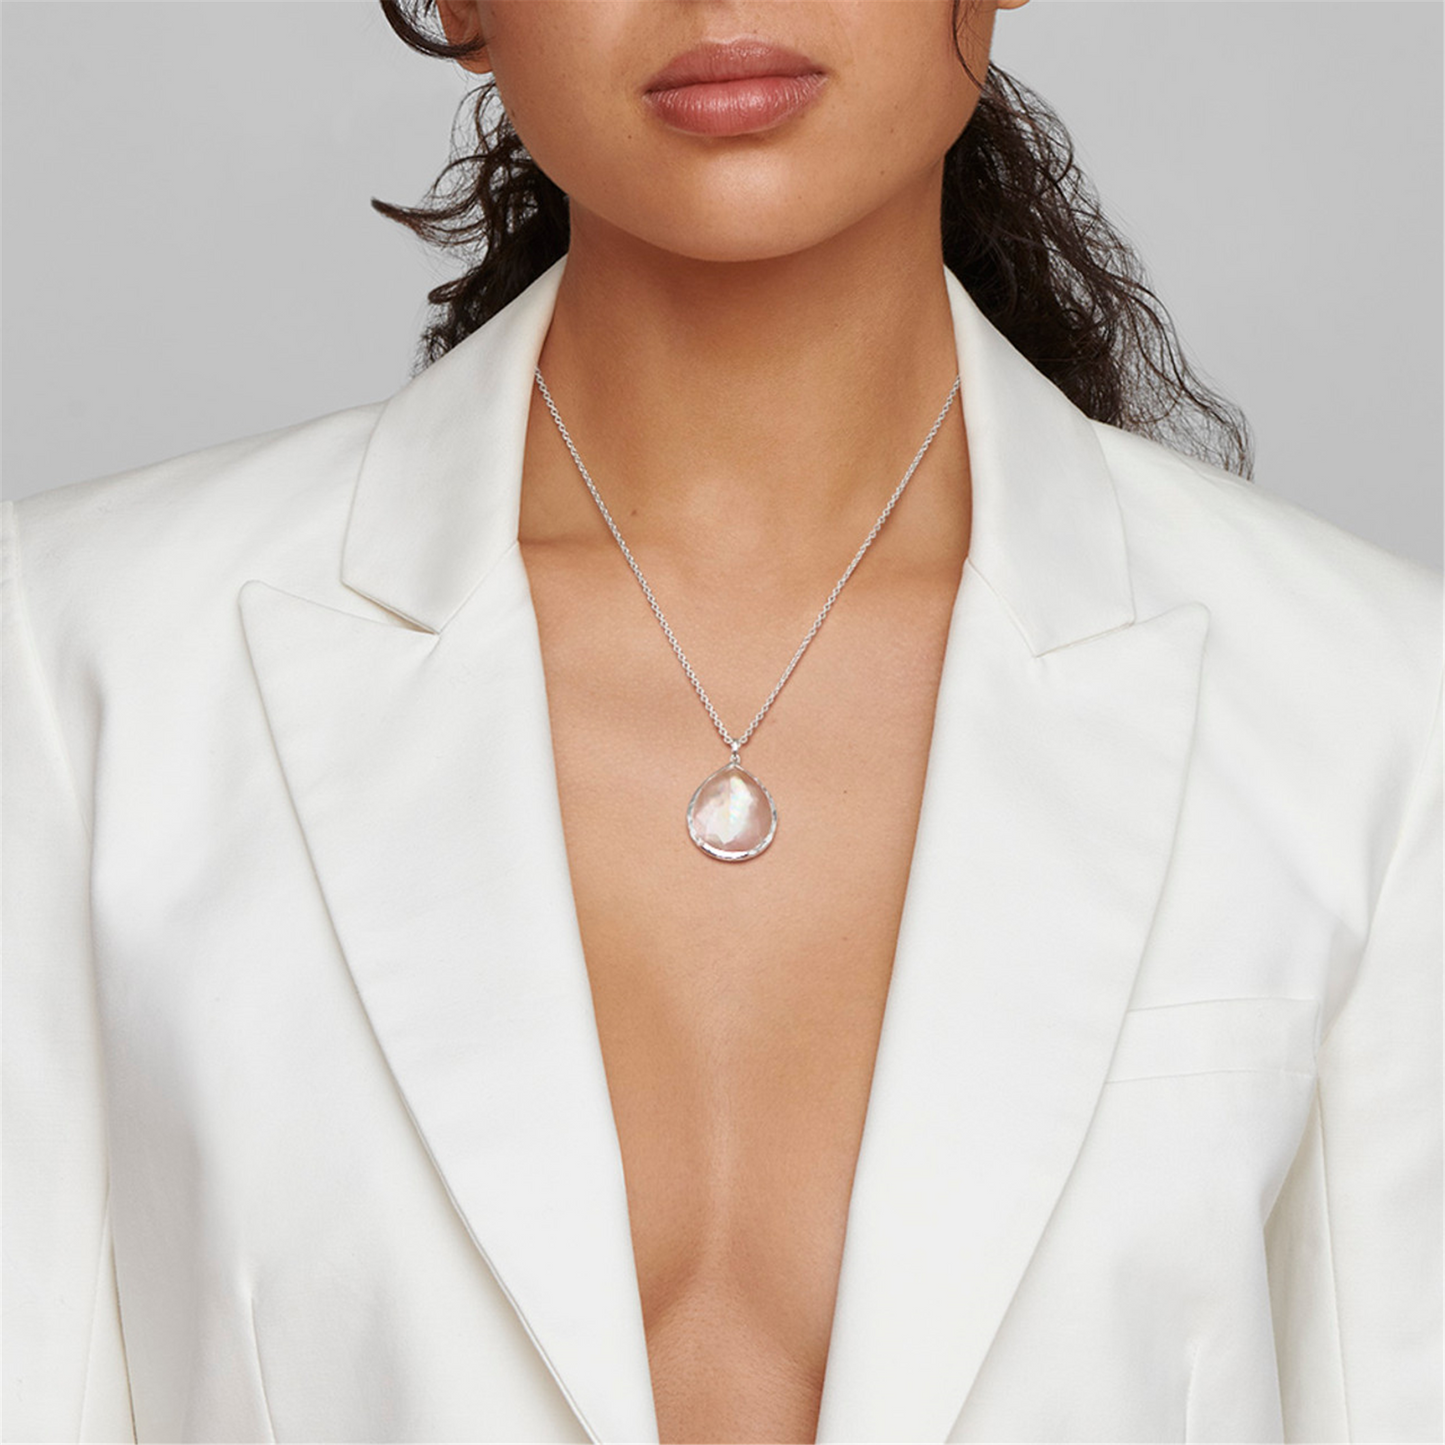 Ippolita Large Silver Teardrop Mother of Pearl Doublet Necklace